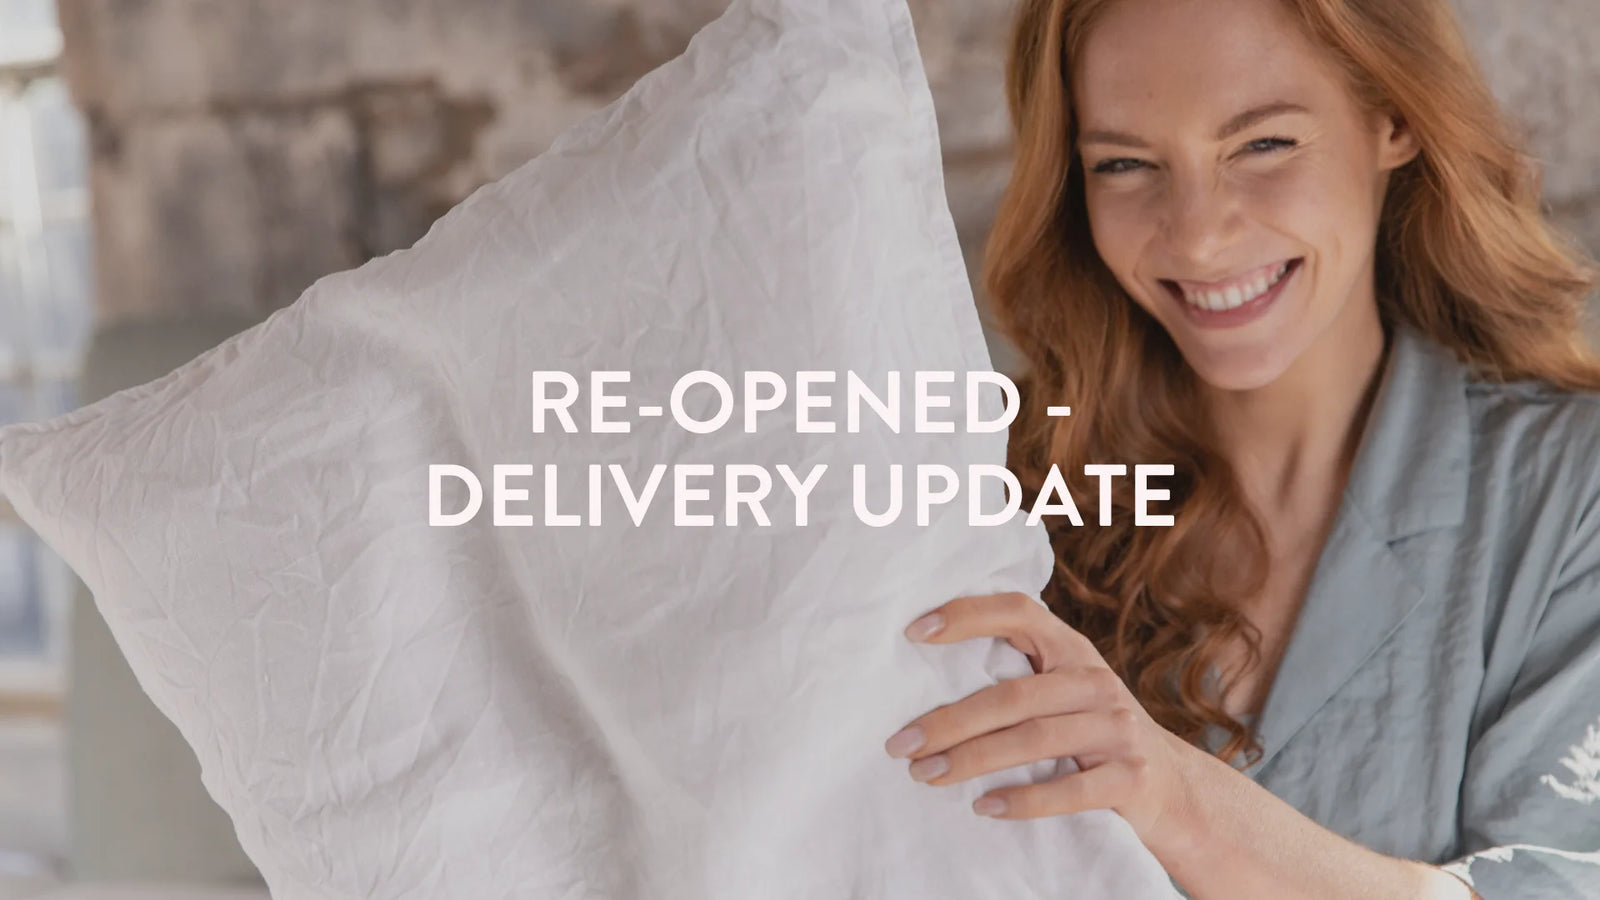 Re-opened - Delivery Update